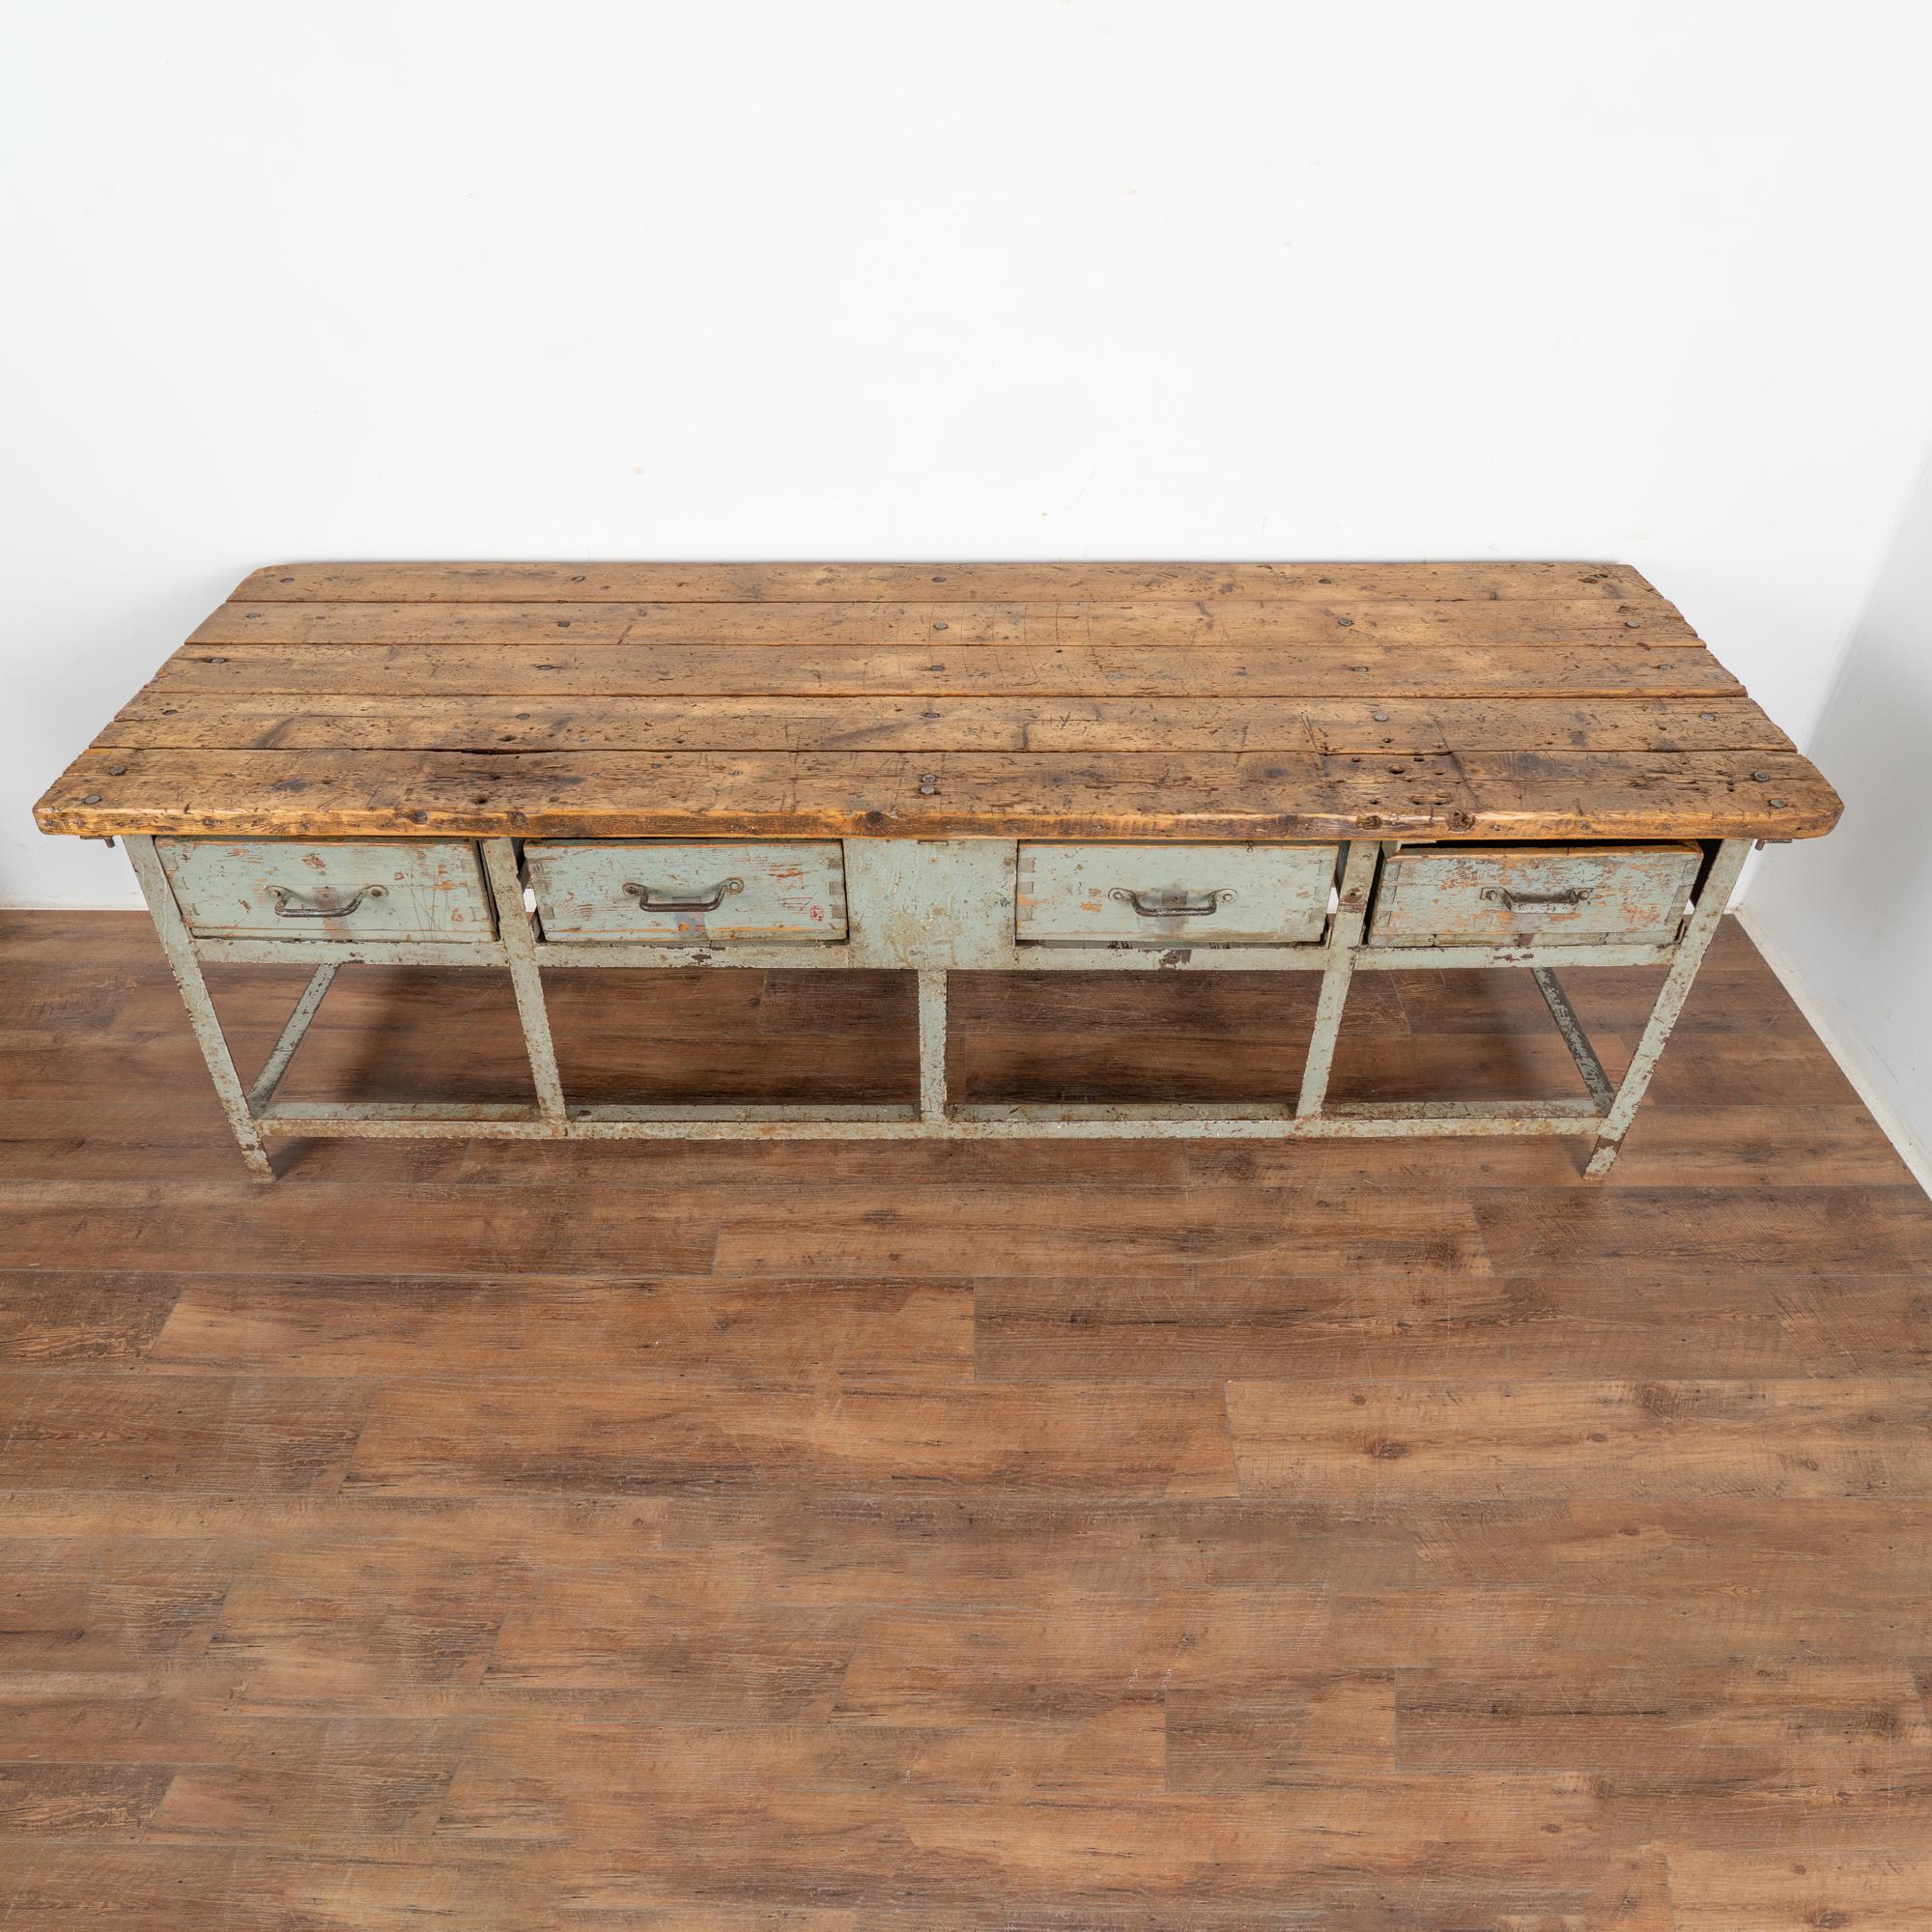 Hungarian Long Industrial Work Table Kitchen Island with 4 Drawers, Hungary circa 1920-40